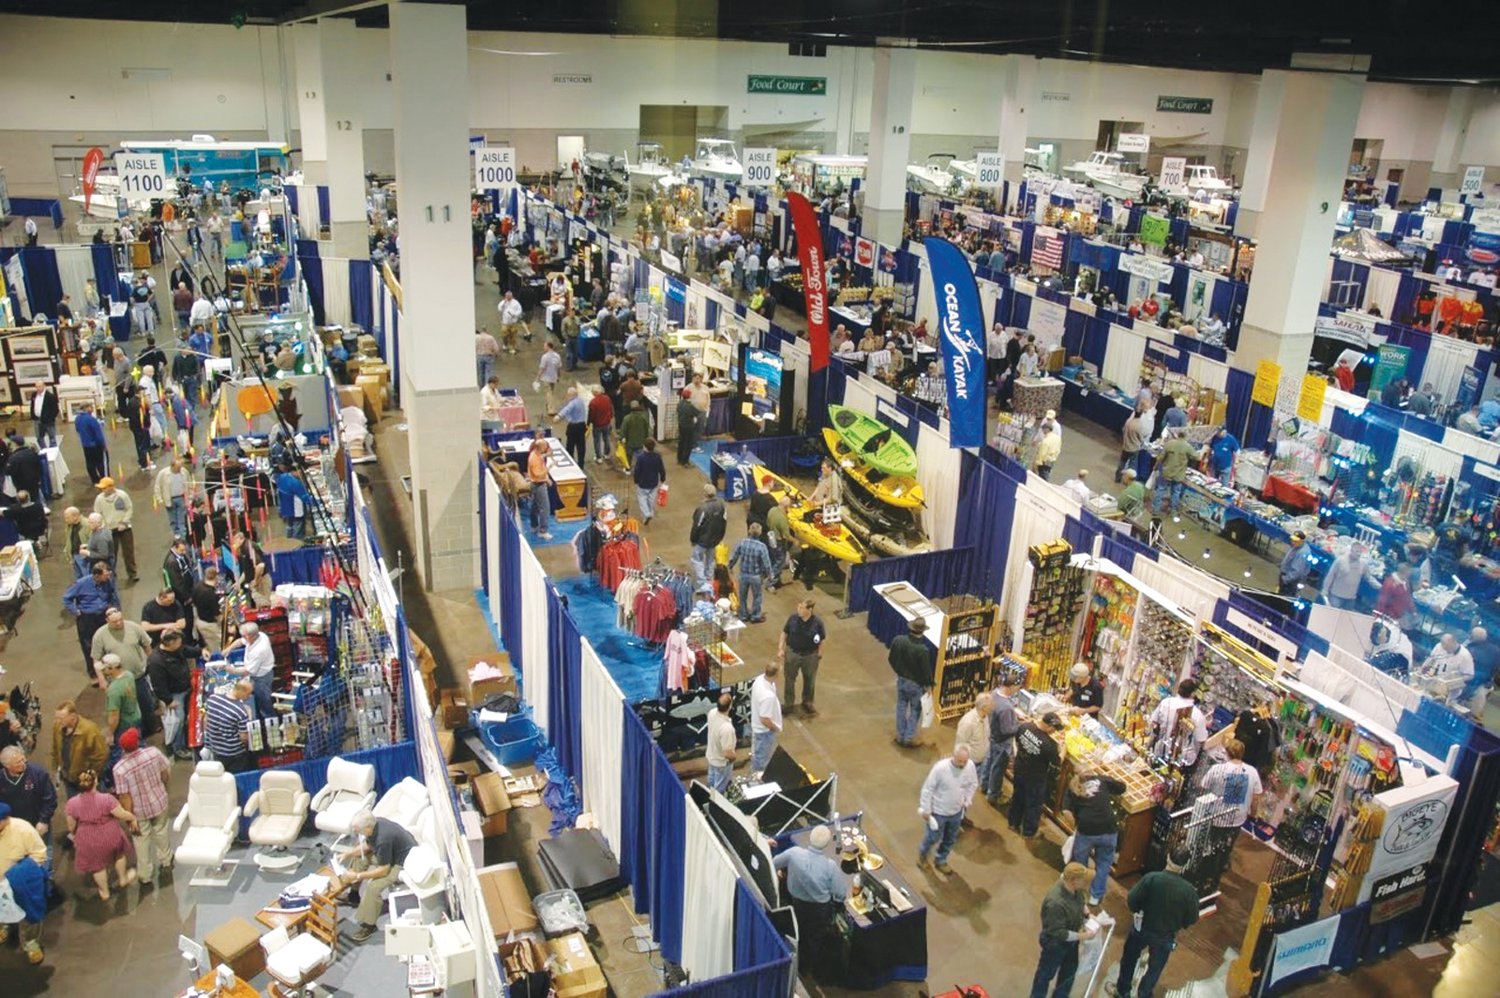 Convention Center is already a record breaker with over 300 booths and free seminars.